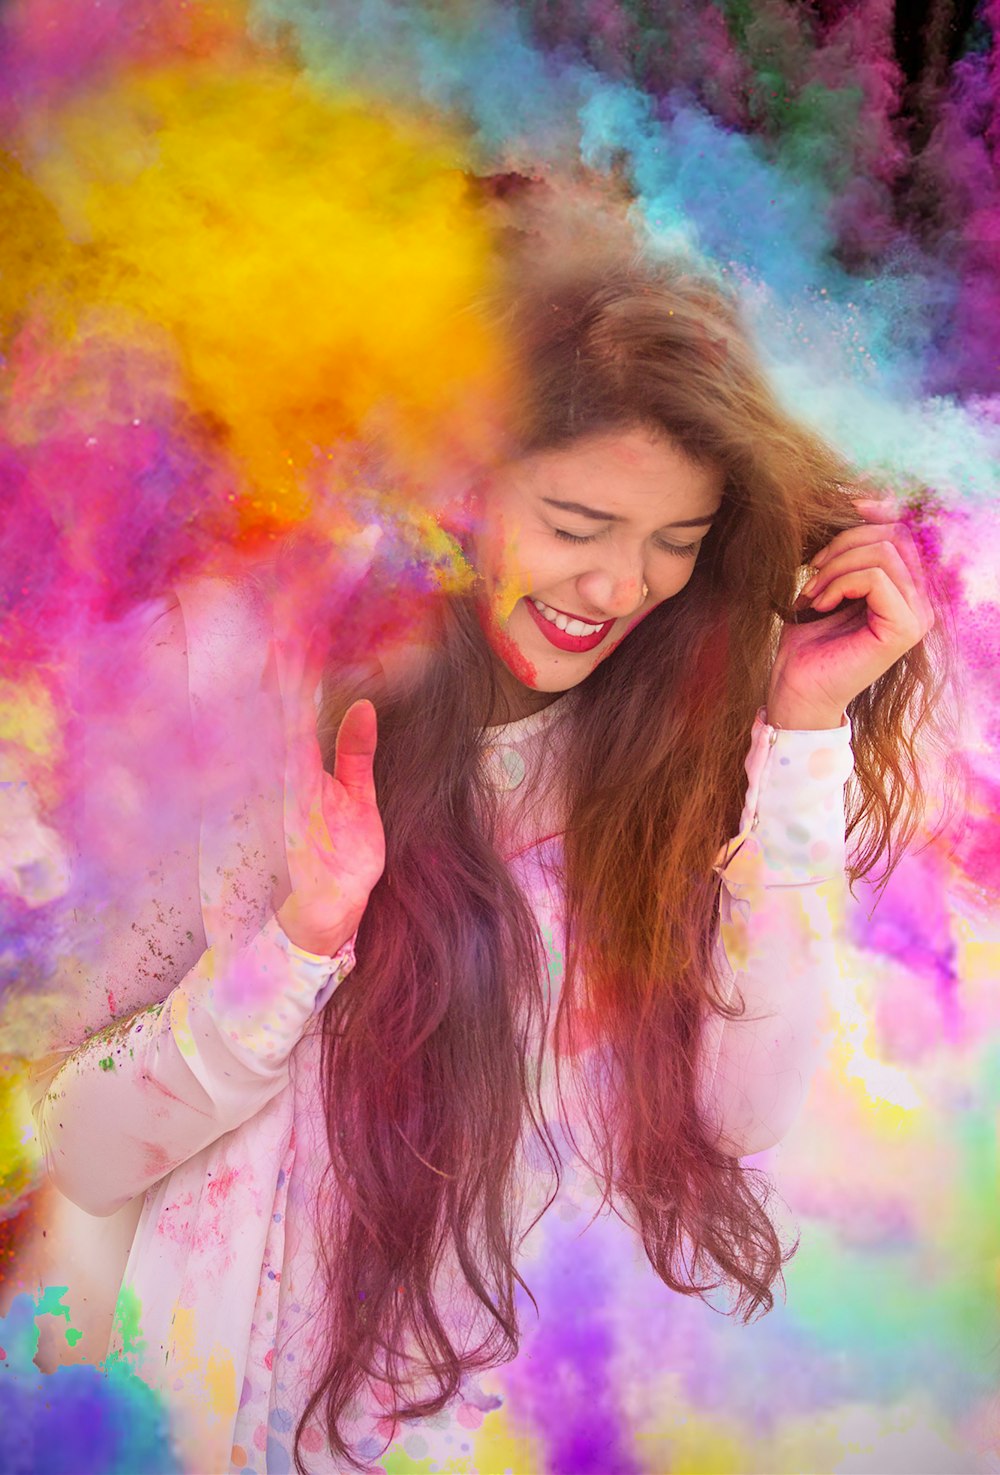 Top 999+ holi images hd – Amazing Collection holi images hd Full 4K